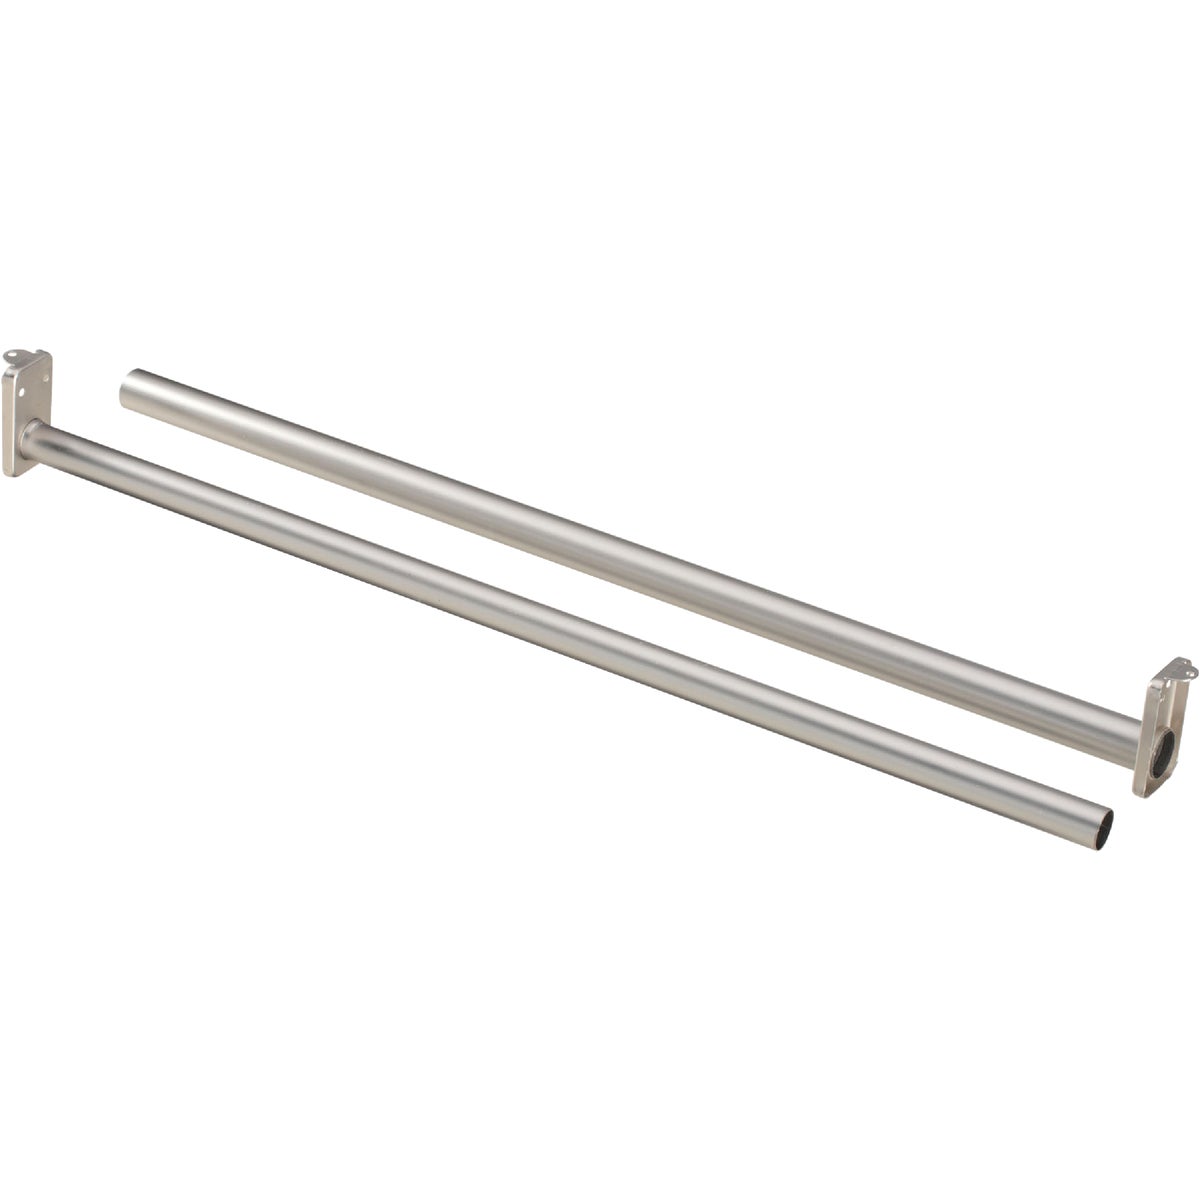 National 72 In. To 120 In. Adjustable Closet Rod, Satin Nickel